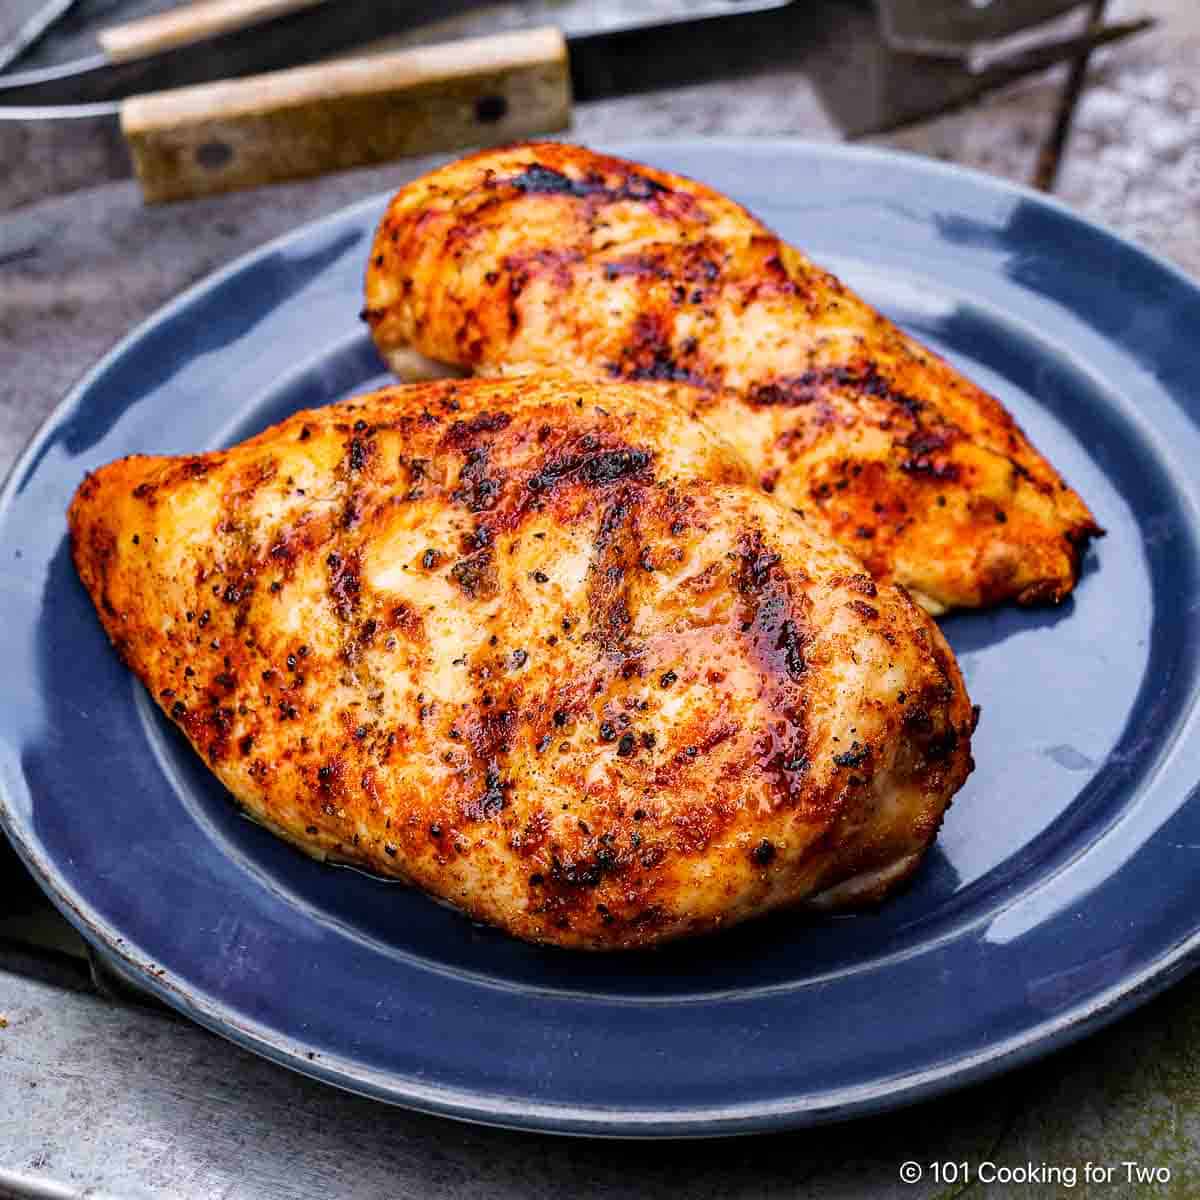 Gordon Ramsay Recipes How To Grill Chicken Breasts On A Gas Grill By Gordon Ramsay